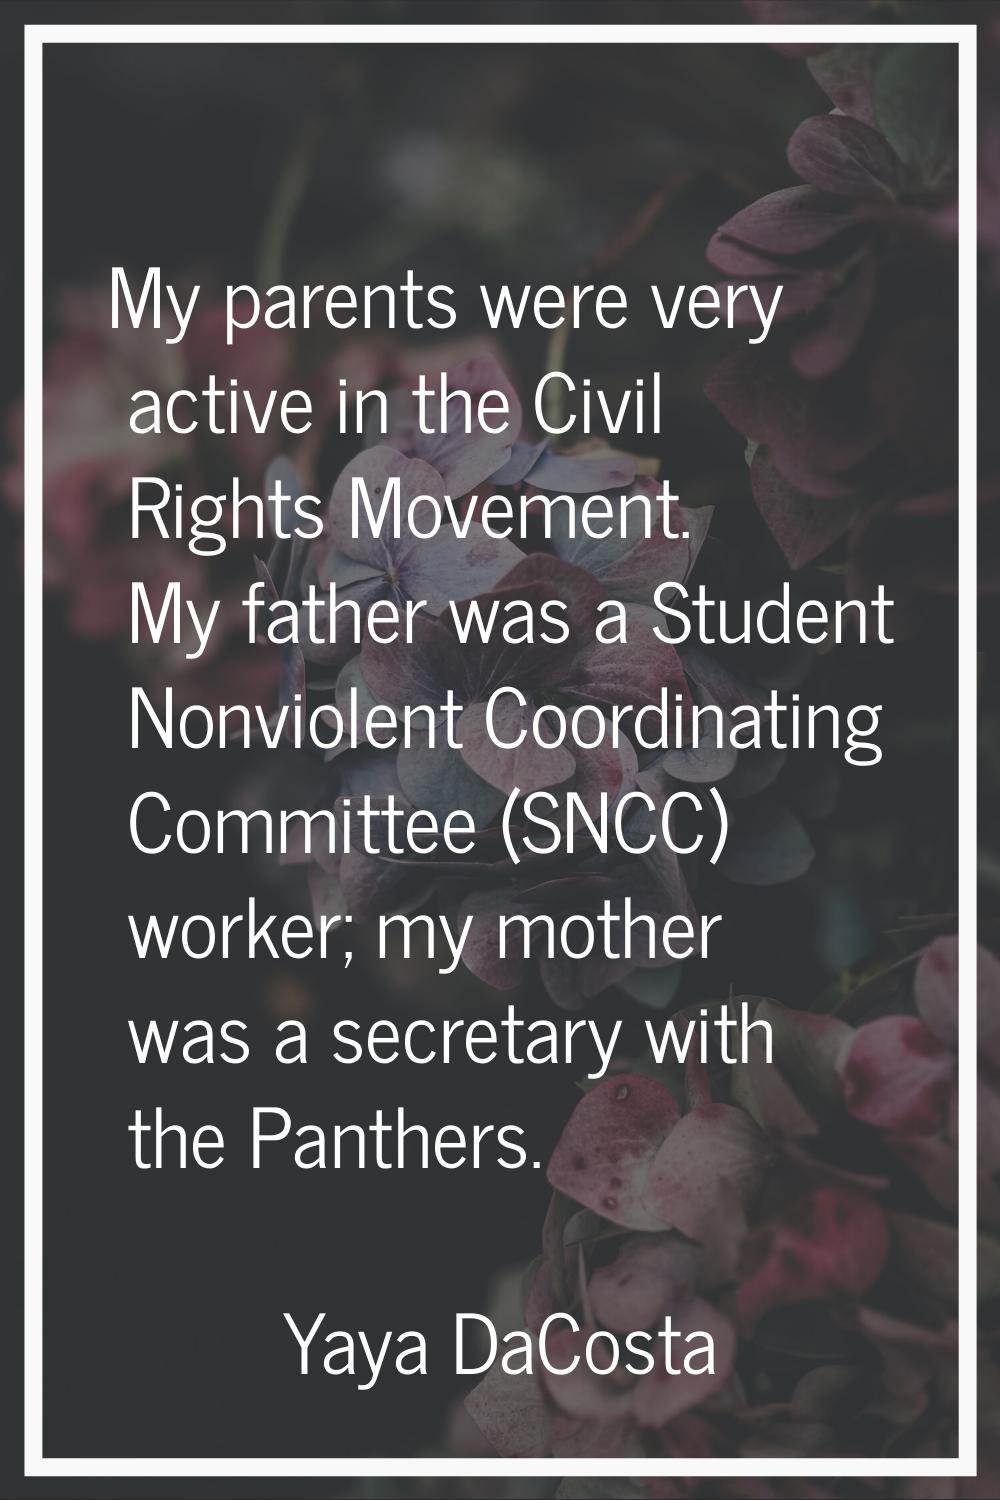 My parents were very active in the Civil Rights Movement. My father was a Student Nonviolent Coordi